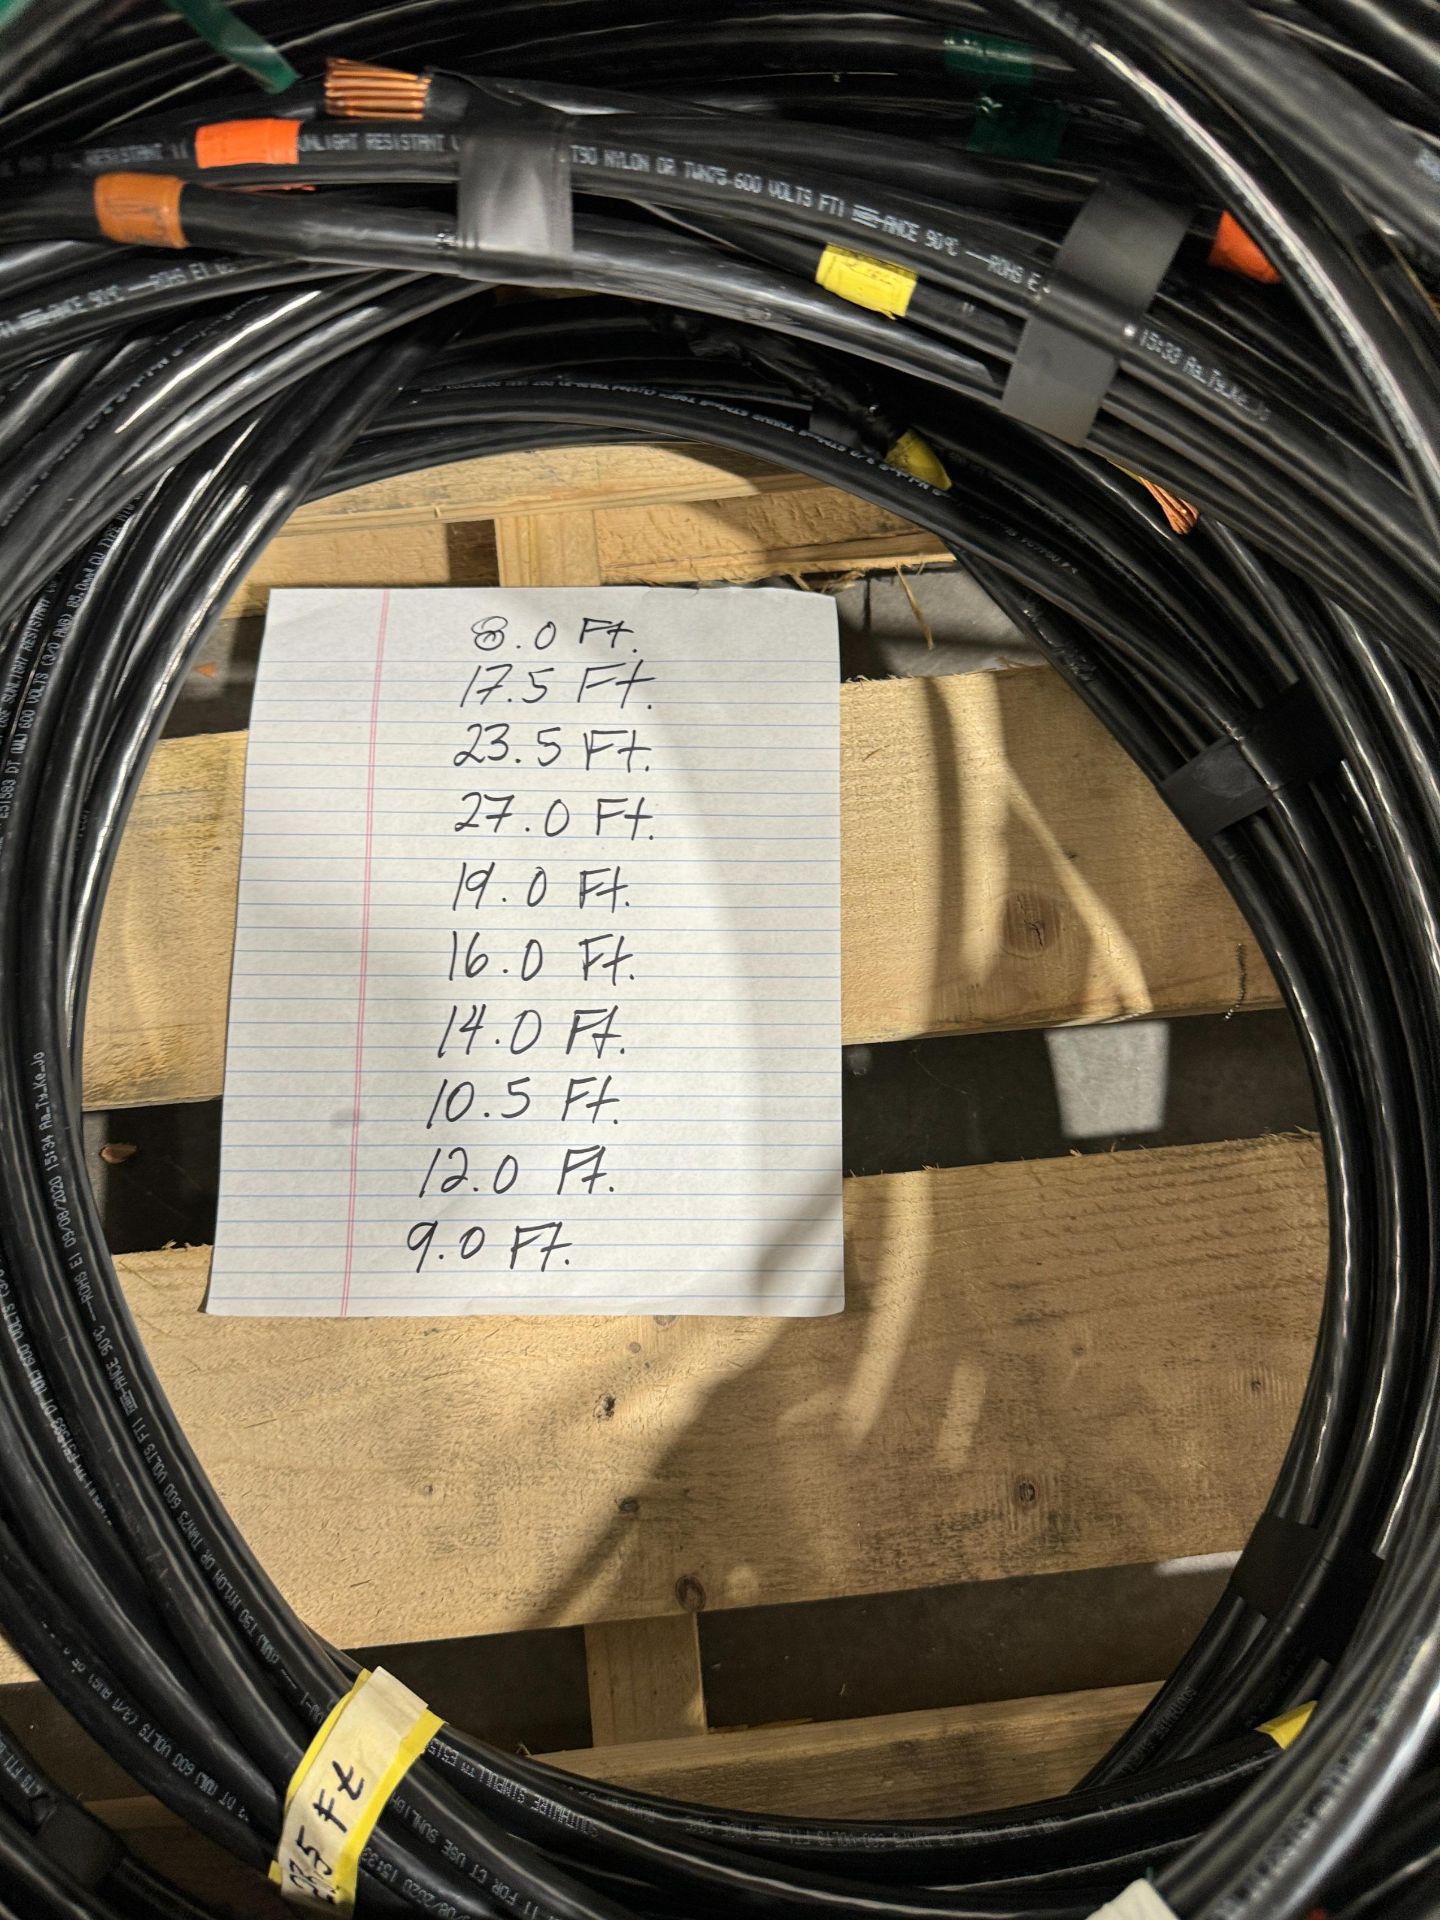 LOT - COPPER CABLE - Image 3 of 3